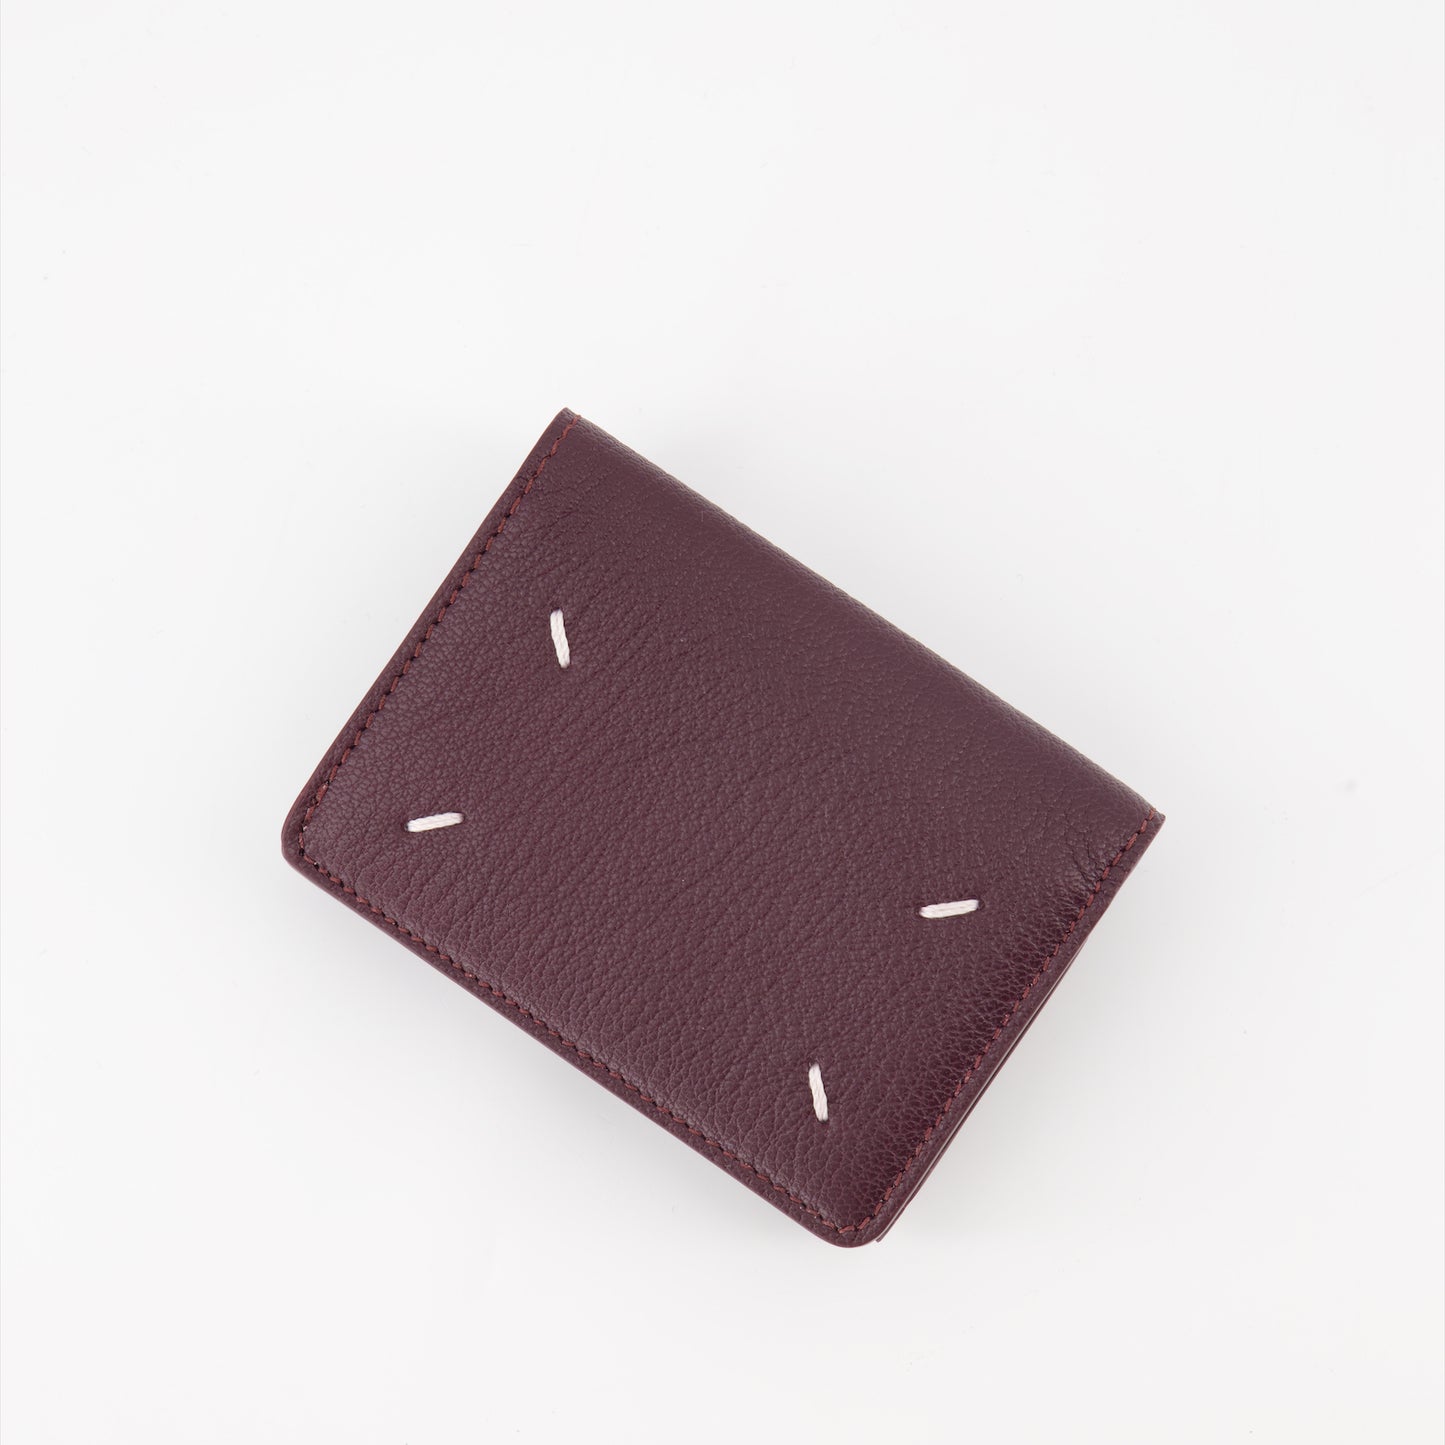 Four Stitches Wallets